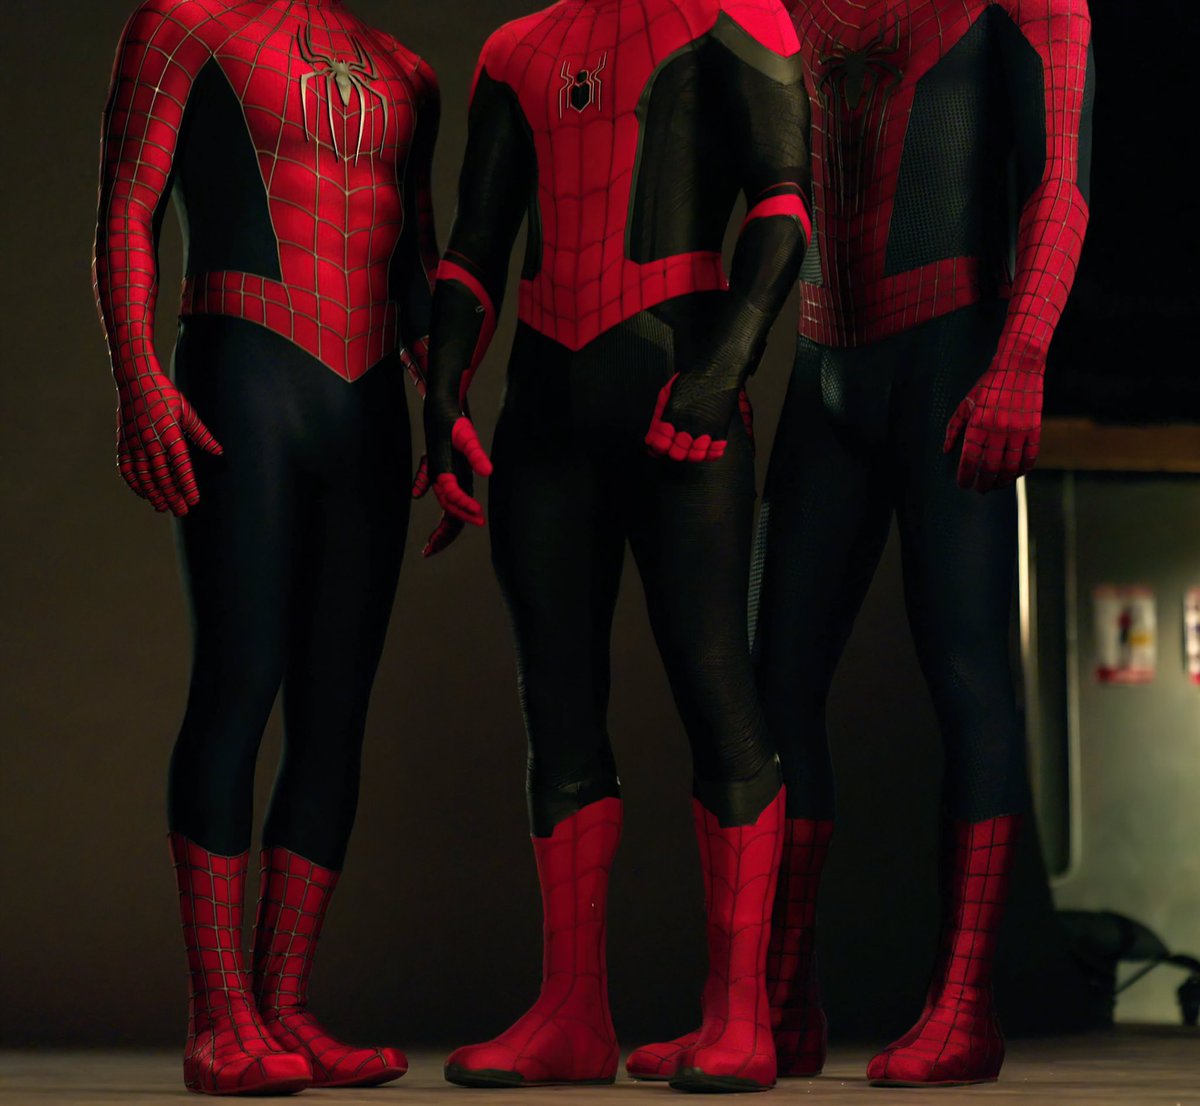 RT @heroichollywood: Which is your favorite Spider-Man suit? https://t.co/JqdhNAVUiK